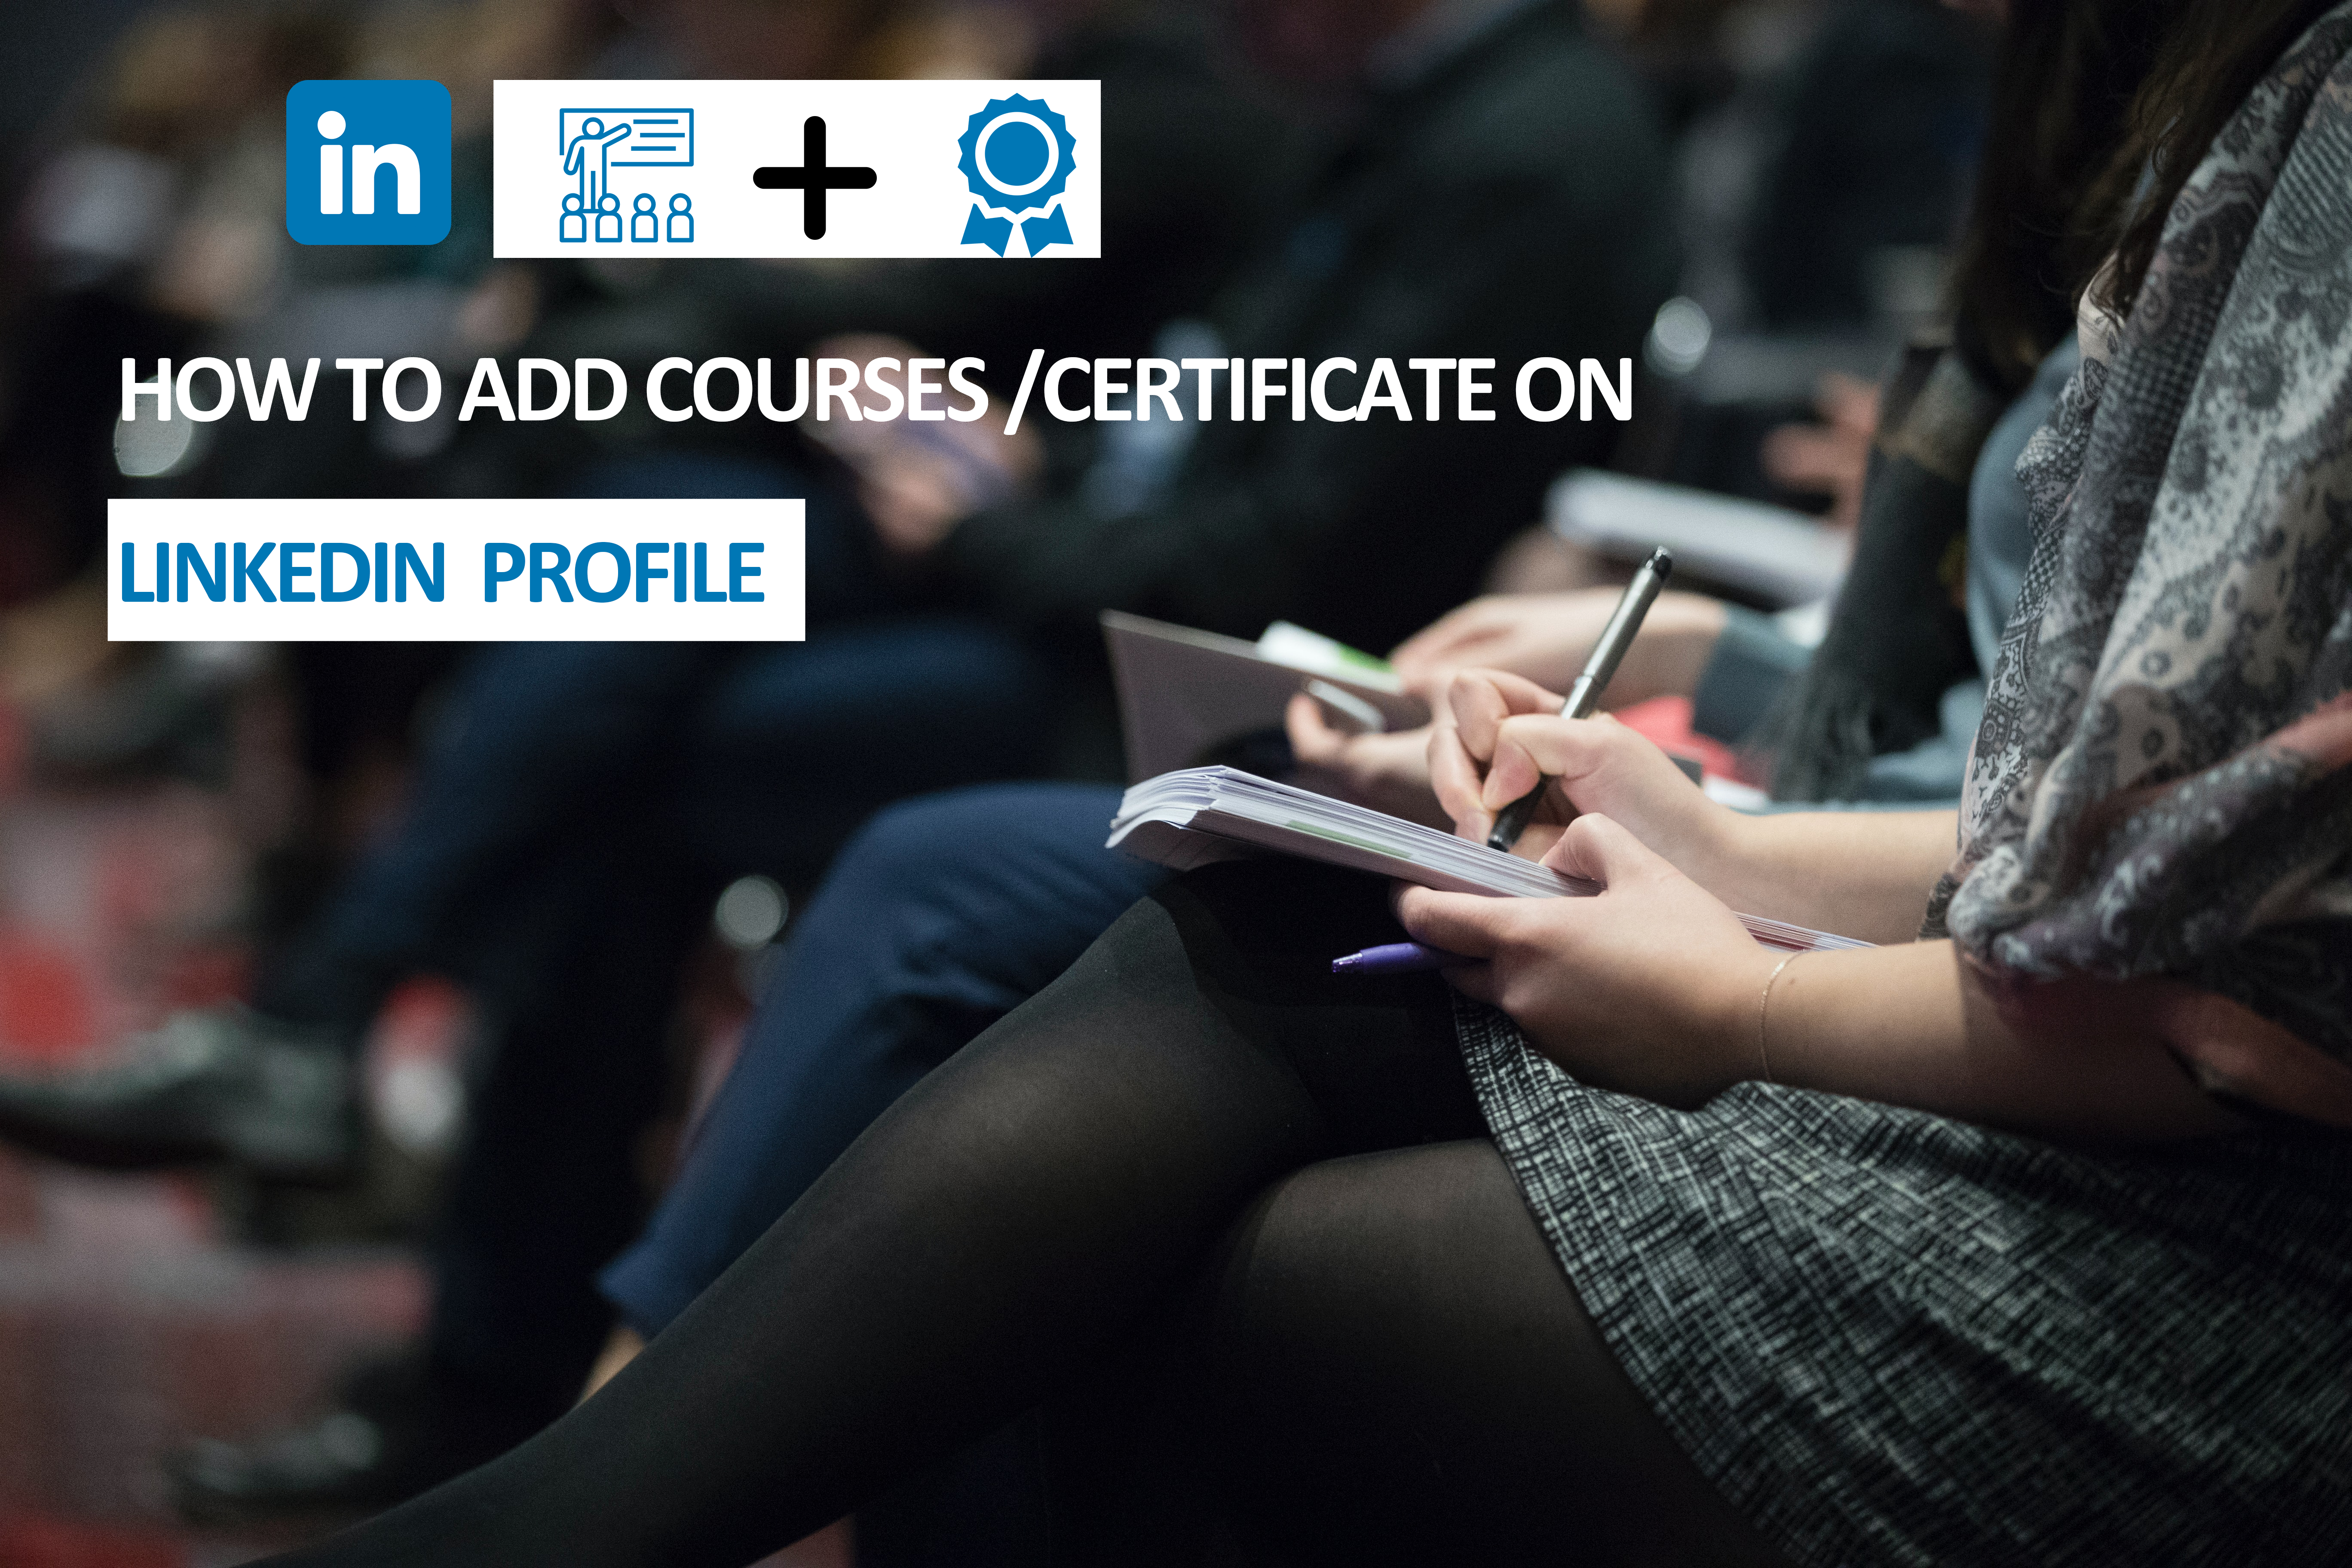 add courses or certificate to linkedin profile